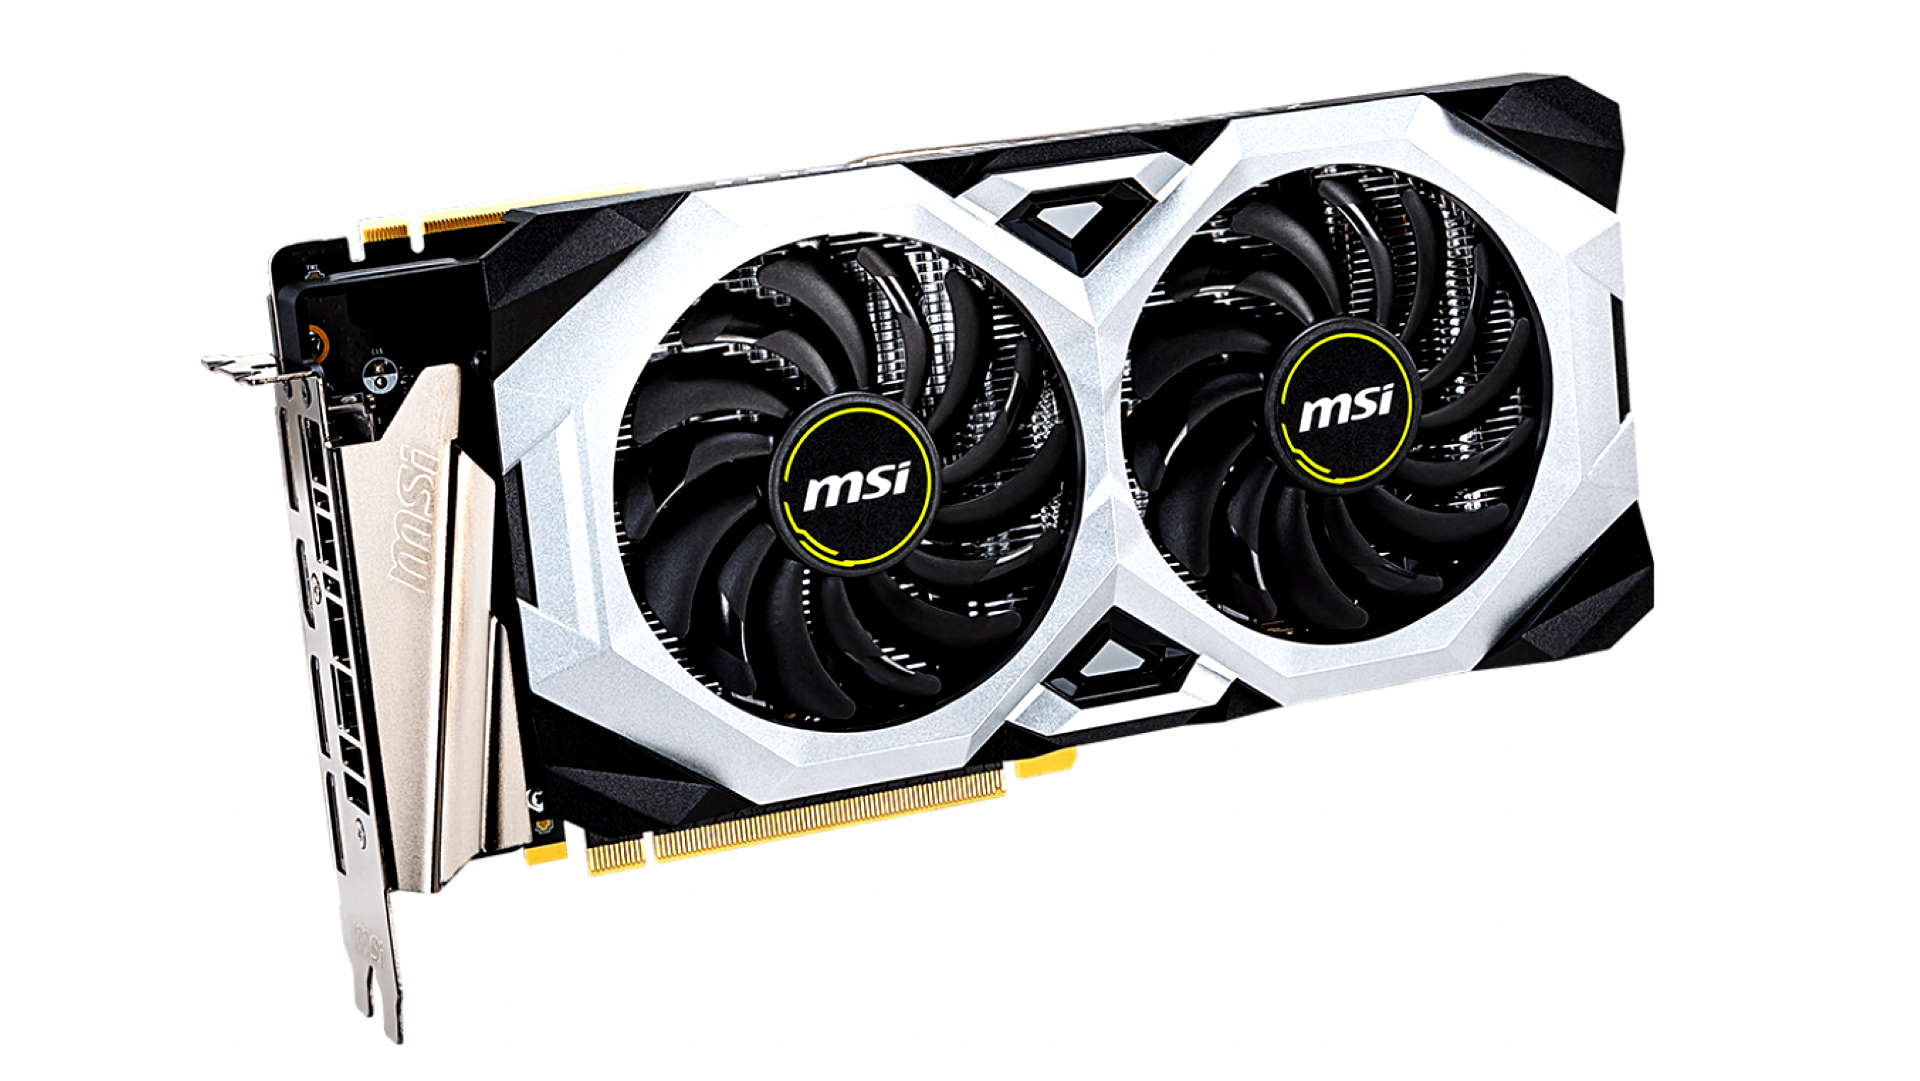 MSI RTX 2070 Super Ventus review – why pay more? | PCGamesN